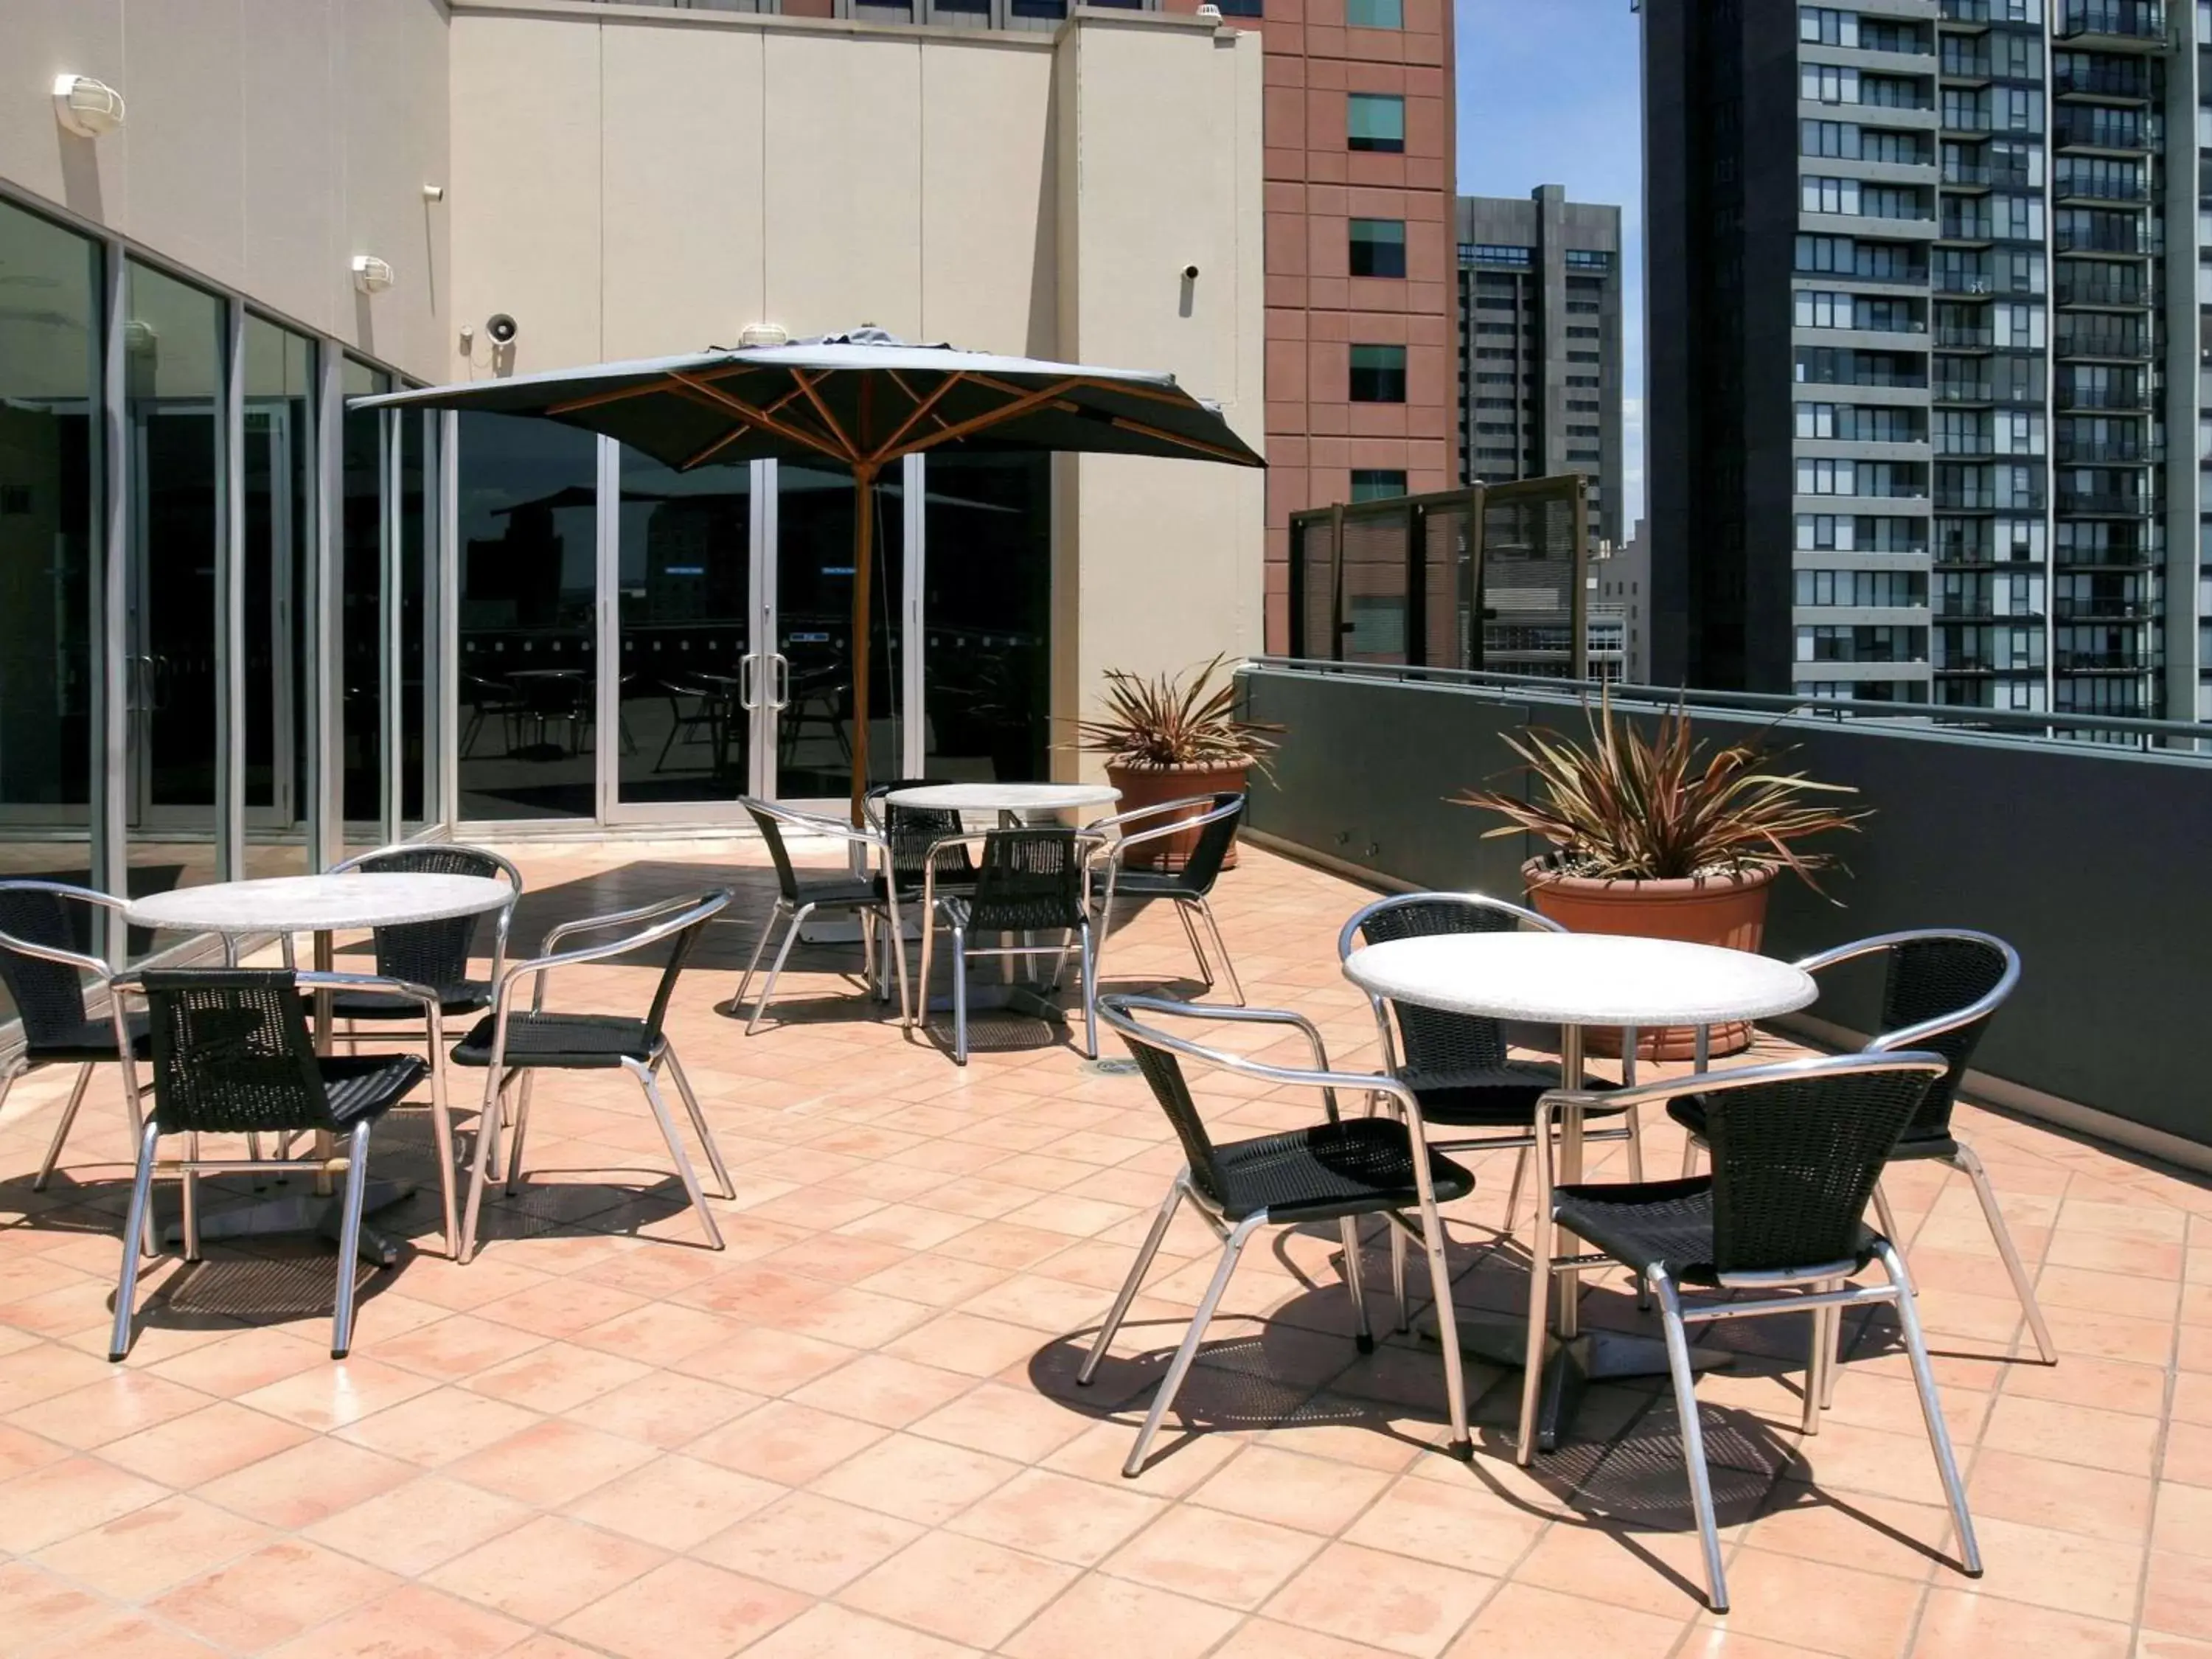 Property building in YEHS Hotel Melbourne CBD